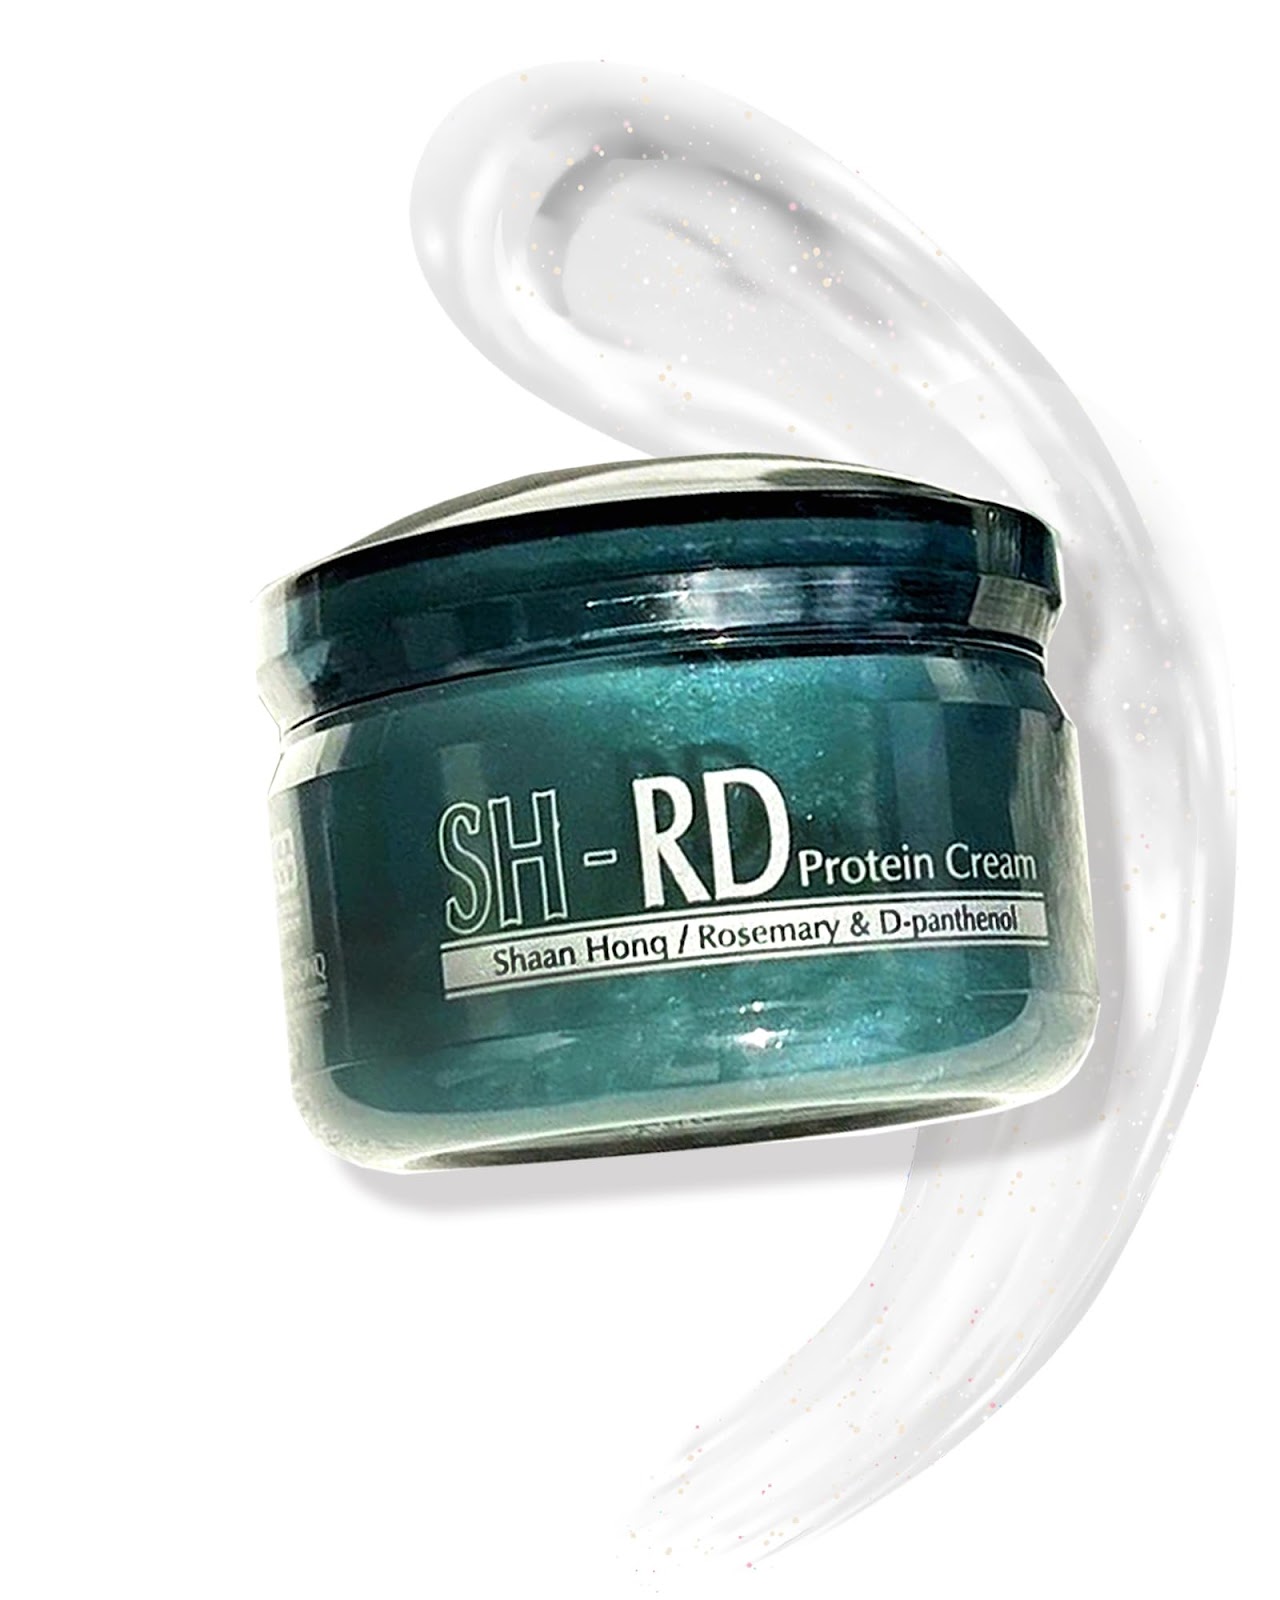 SH-RD Protein Cream - Leave-In 10ml